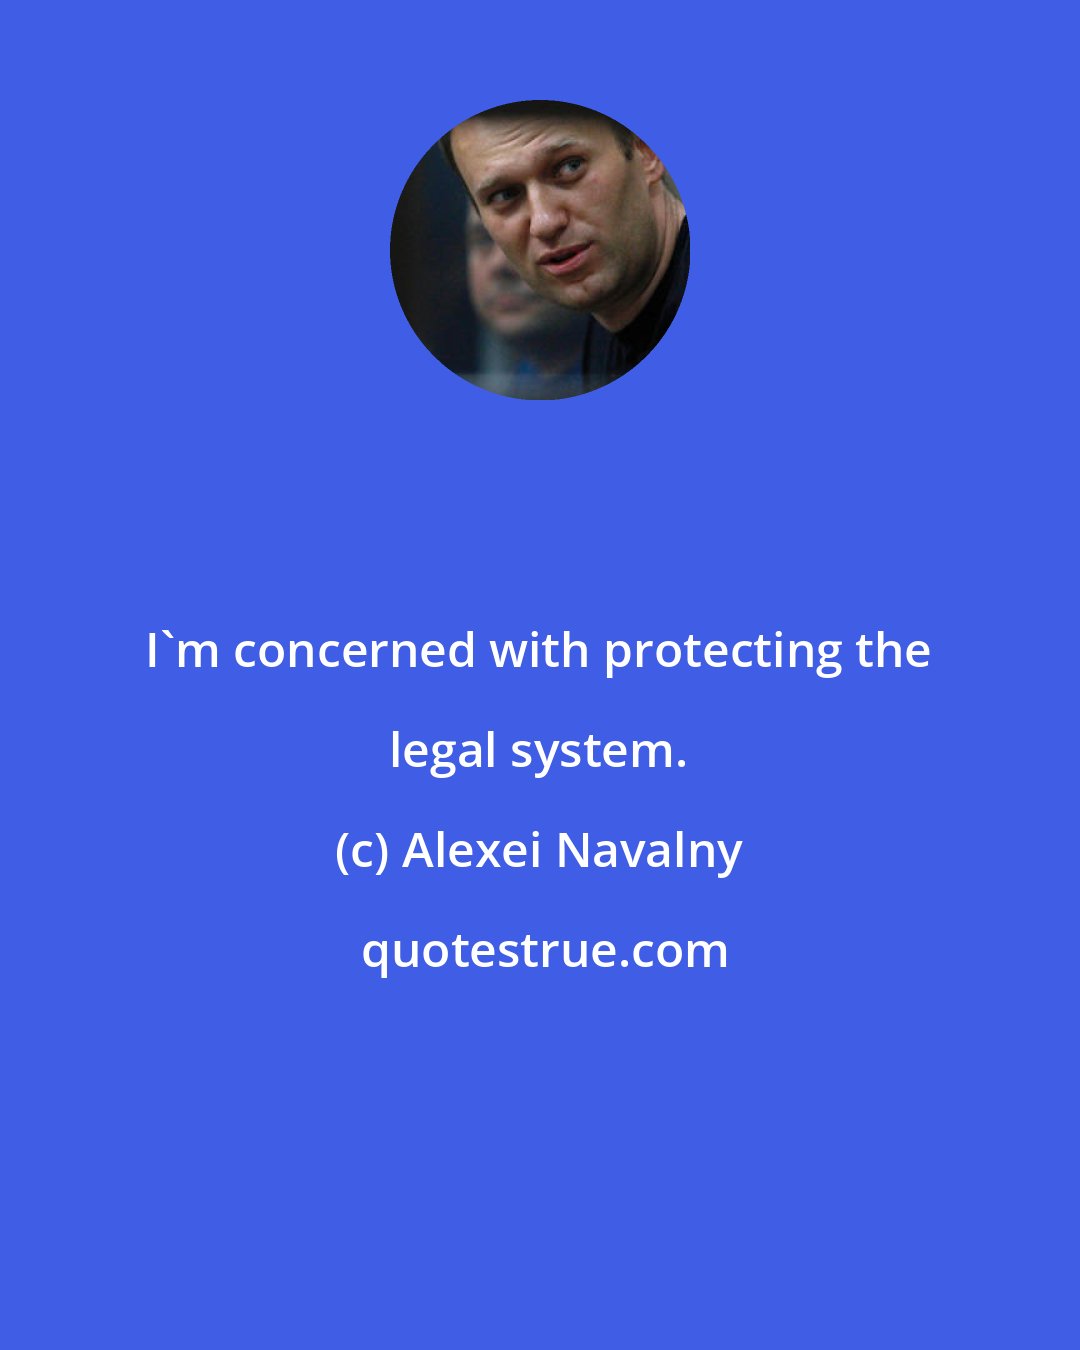 Alexei Navalny: I'm concerned with protecting the legal system.